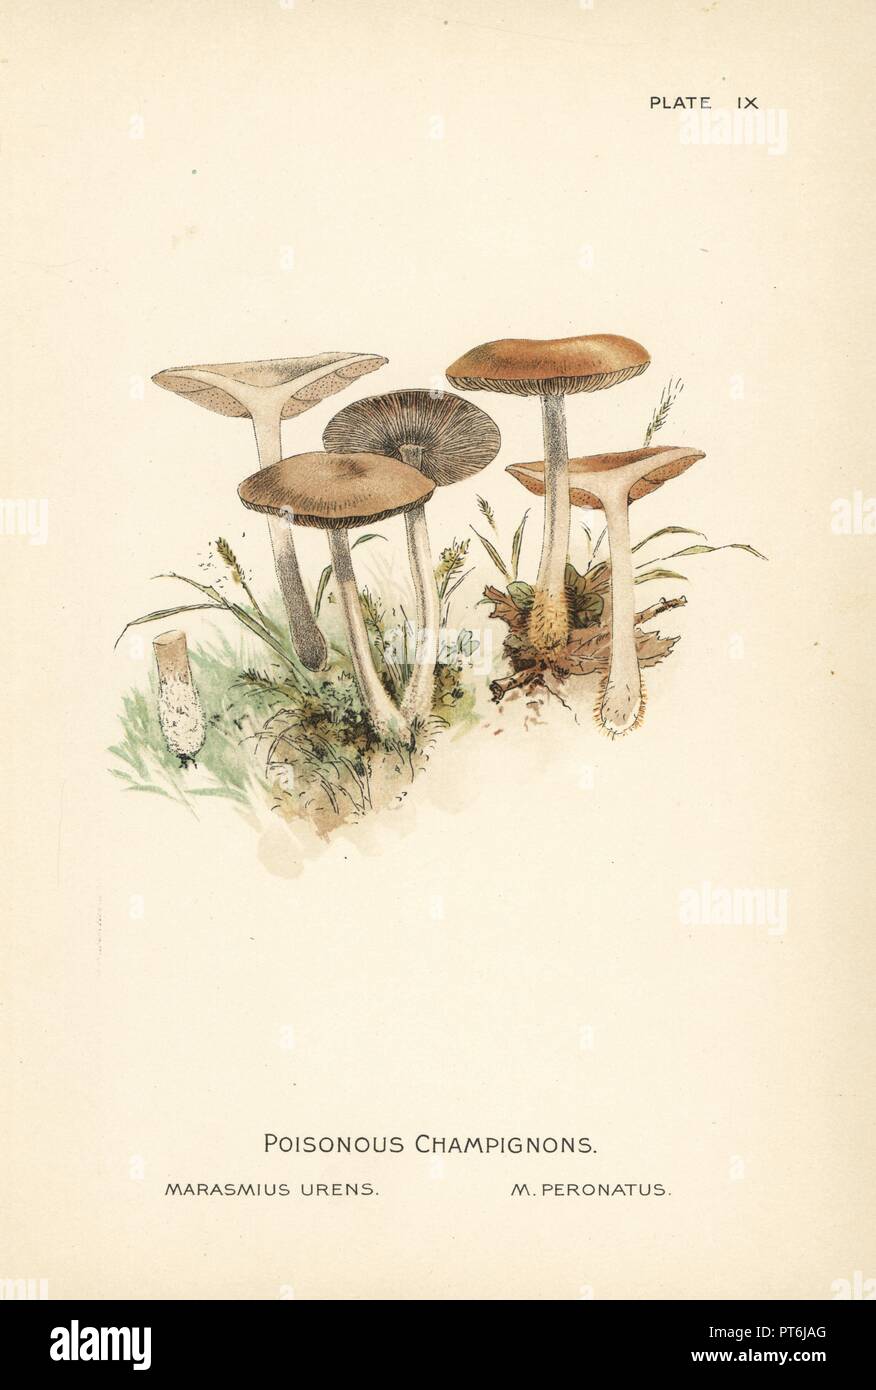 Poisonous champignon or wood woollyfoot, Gymnopus peronatus (as Marasmius urens and Marasmius peronatus). Chromolithograph after a botanical illustration by William Hamilton Gibson from his book Our Edible Toadstools and Mushrooms, Harper, New York, 1895. Stock Photo